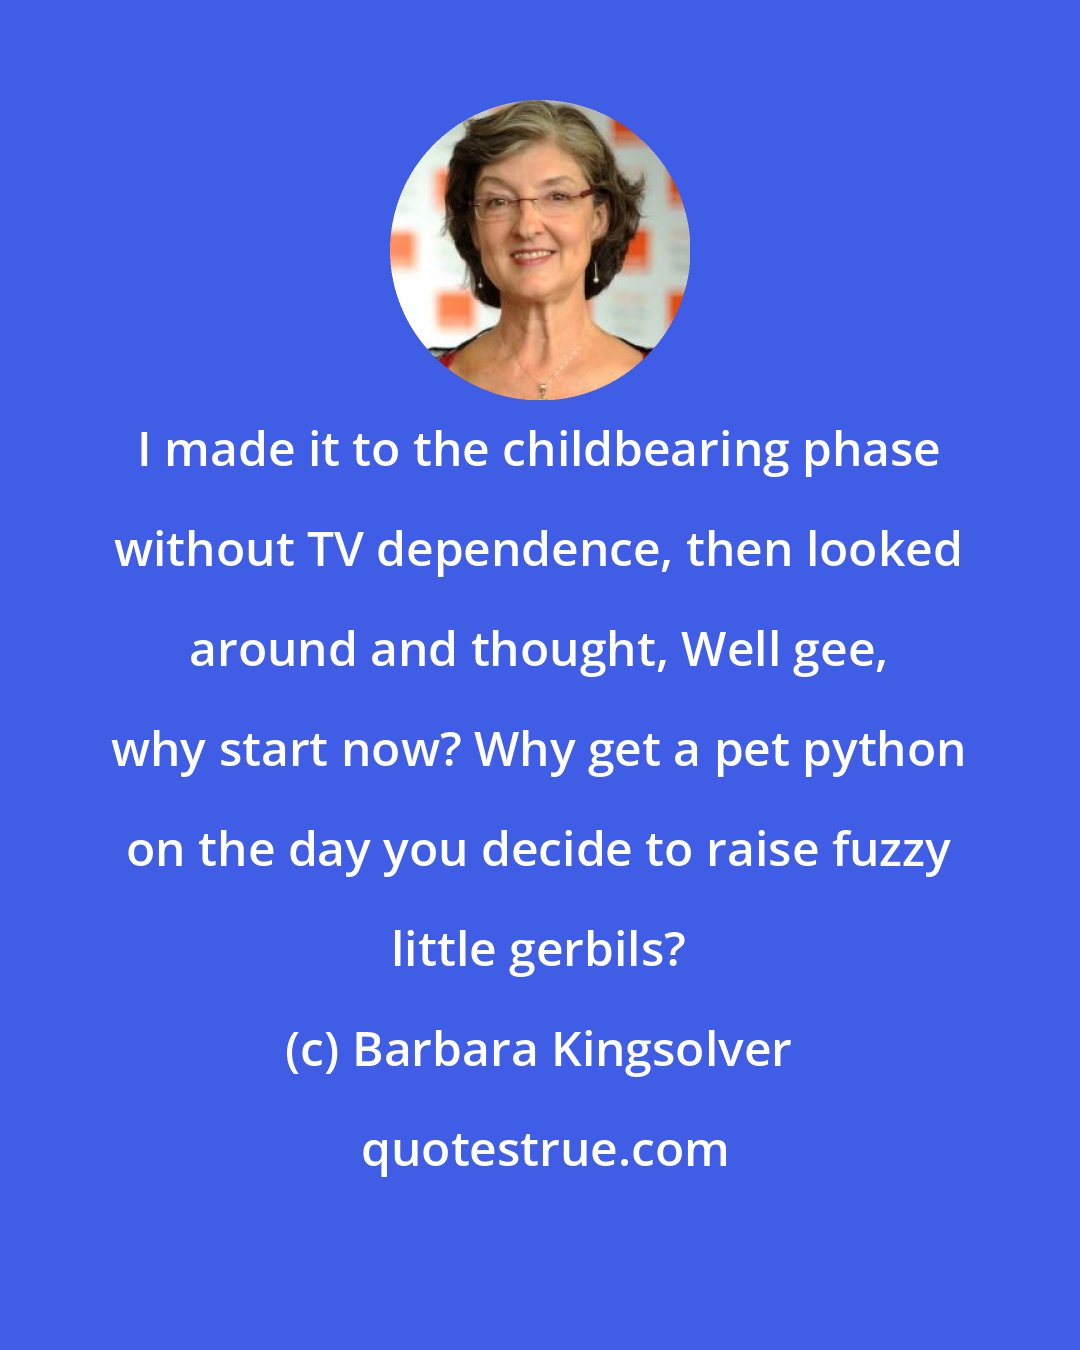 Barbara Kingsolver: I made it to the childbearing phase without TV dependence, then looked around and thought, Well gee, why start now? Why get a pet python on the day you decide to raise fuzzy little gerbils?